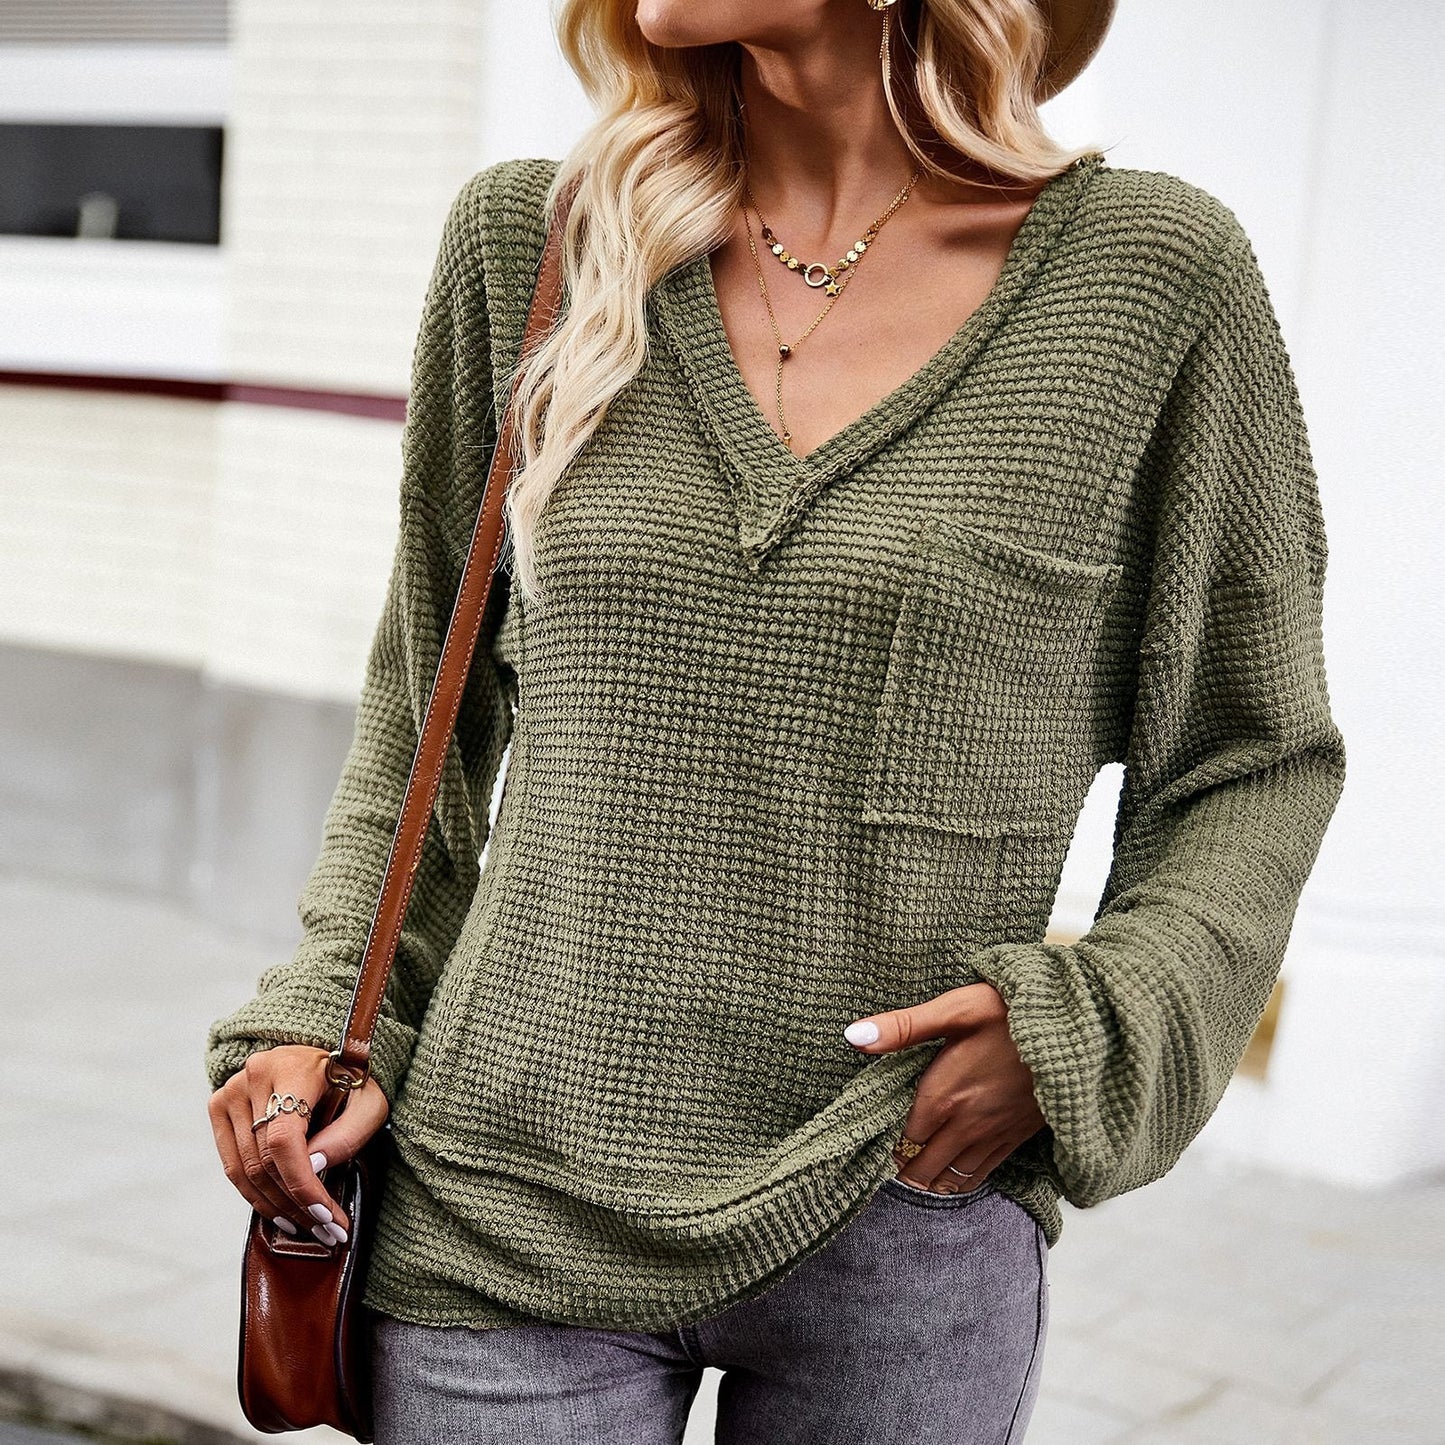 Solid color knitted shirt women's V-neck long sleeved top